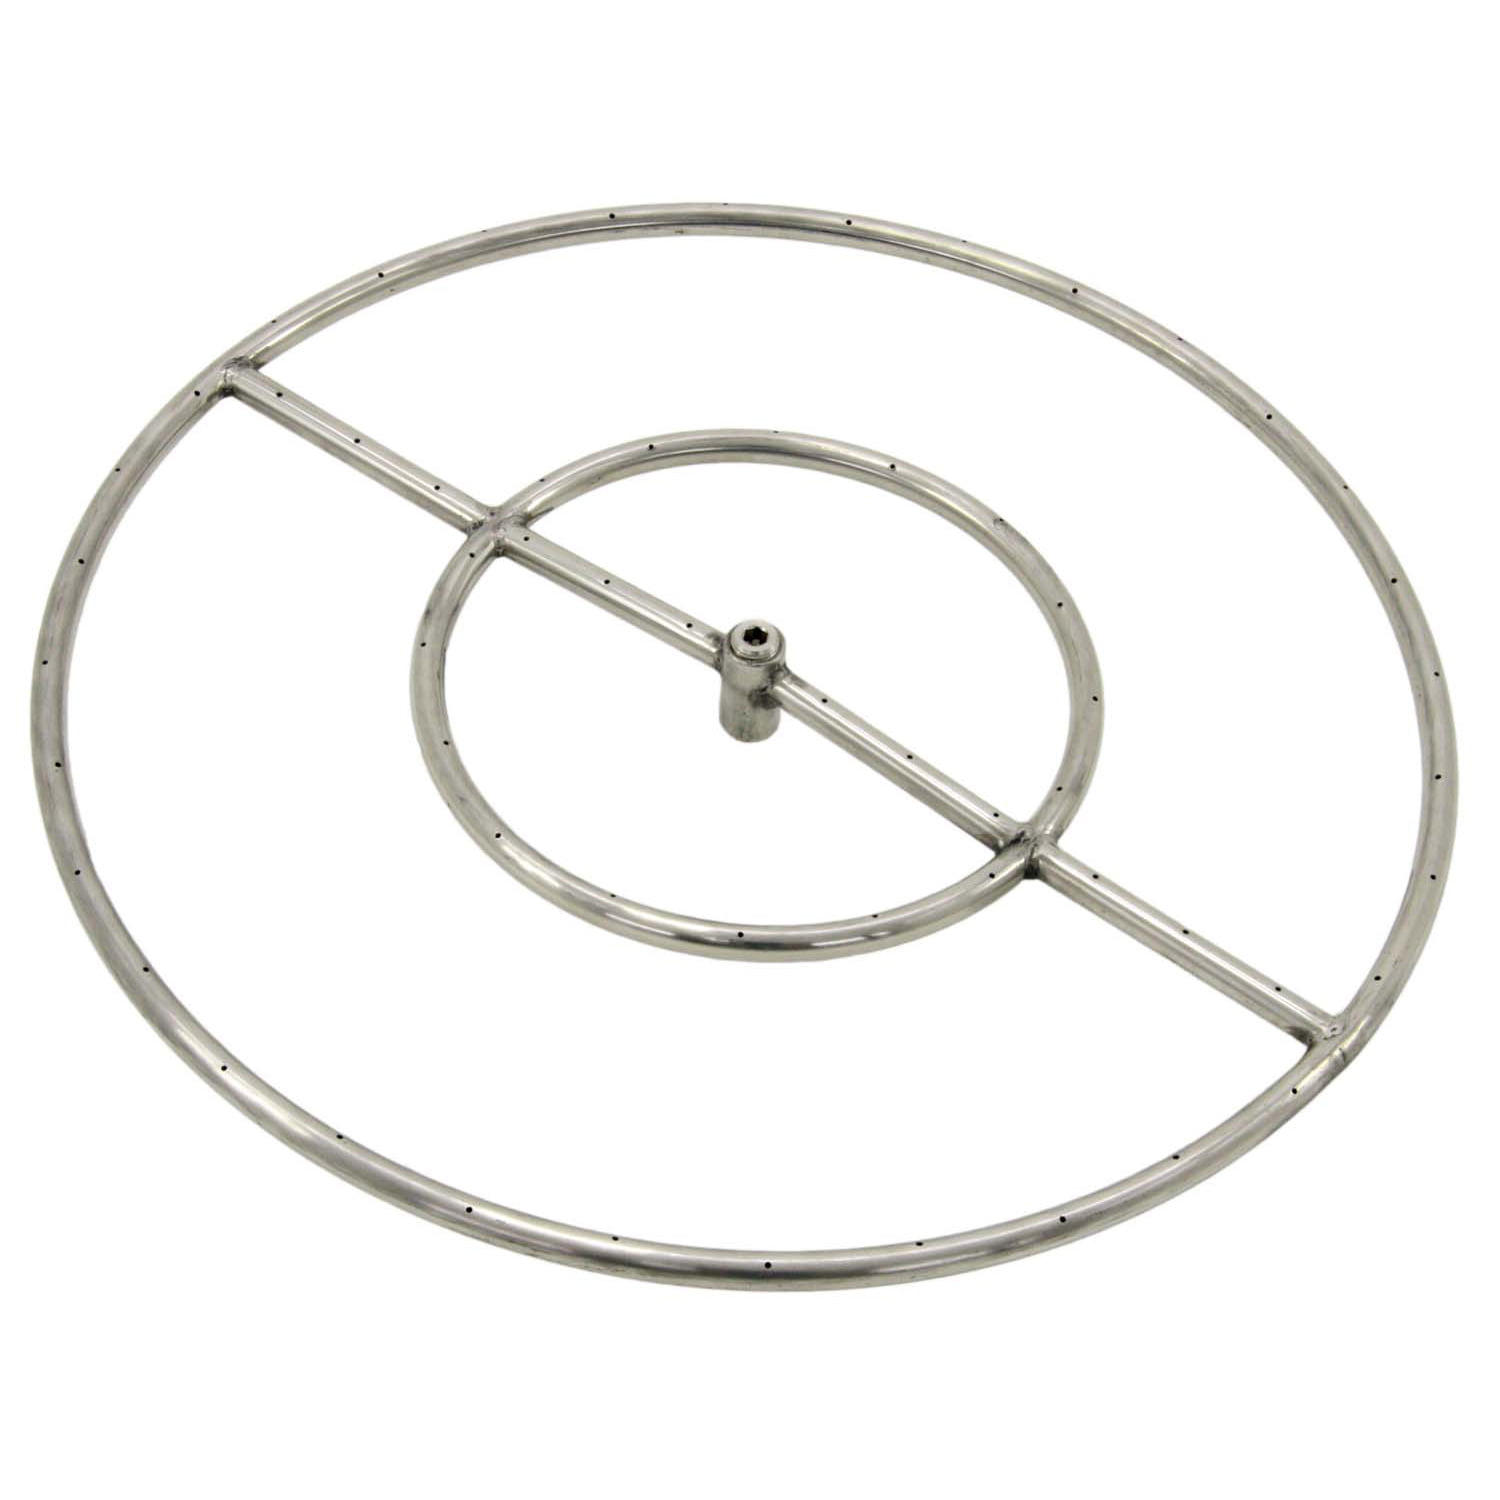 Hpc Round Stainless Steel Fire Pit, 24 Round Stainless Steel Gas Fire Pit Burner Ring Kit